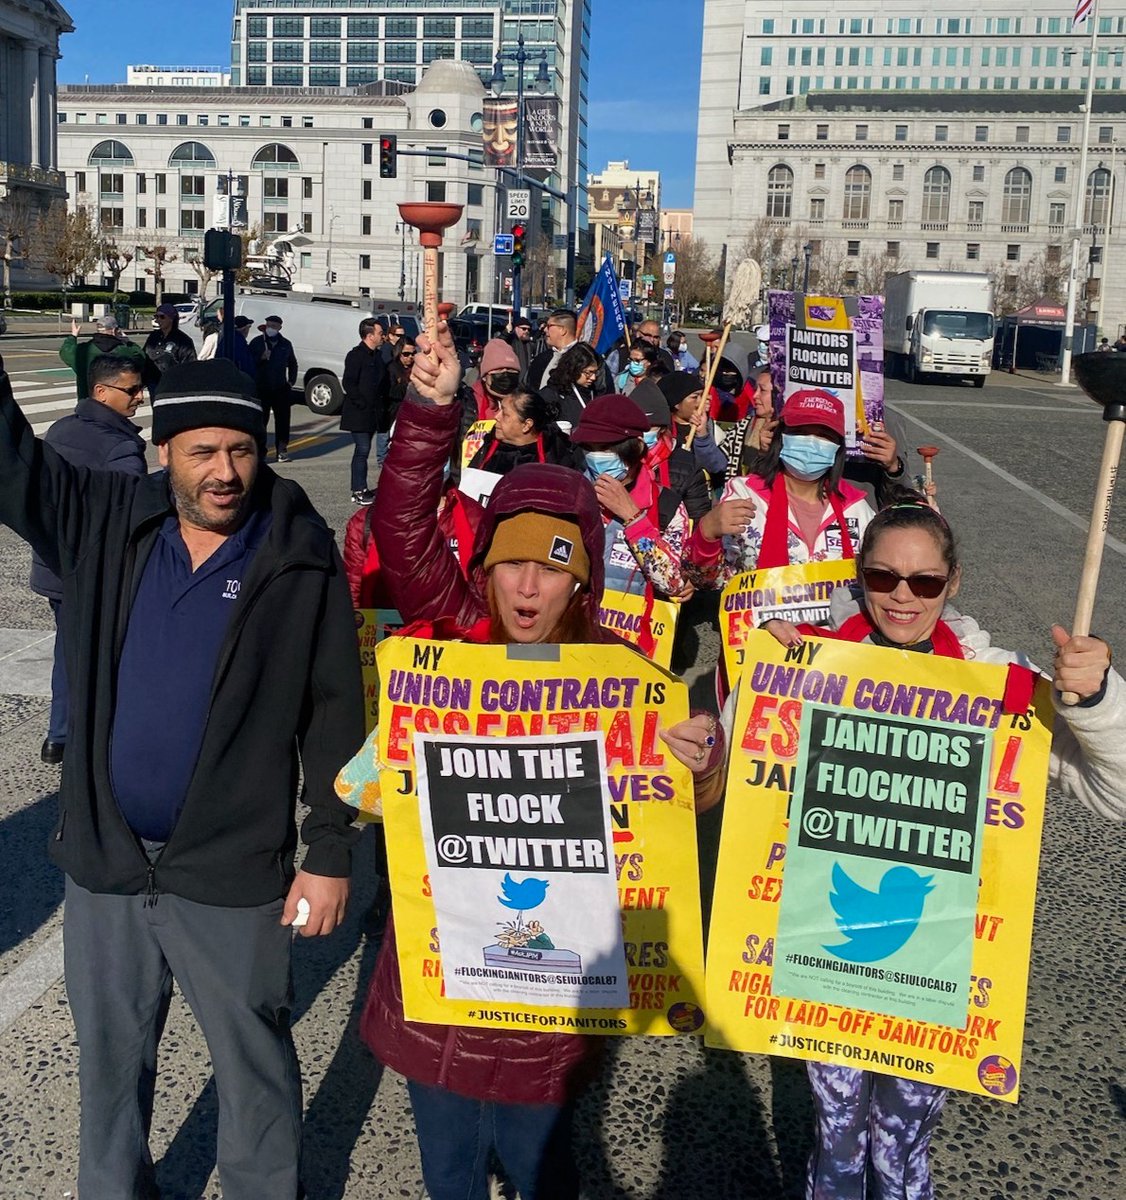 UNION JANITORS are marching today to demand they get their jobs back! @Twitter and big tech should support good union jobs! #JusticeForJanitors